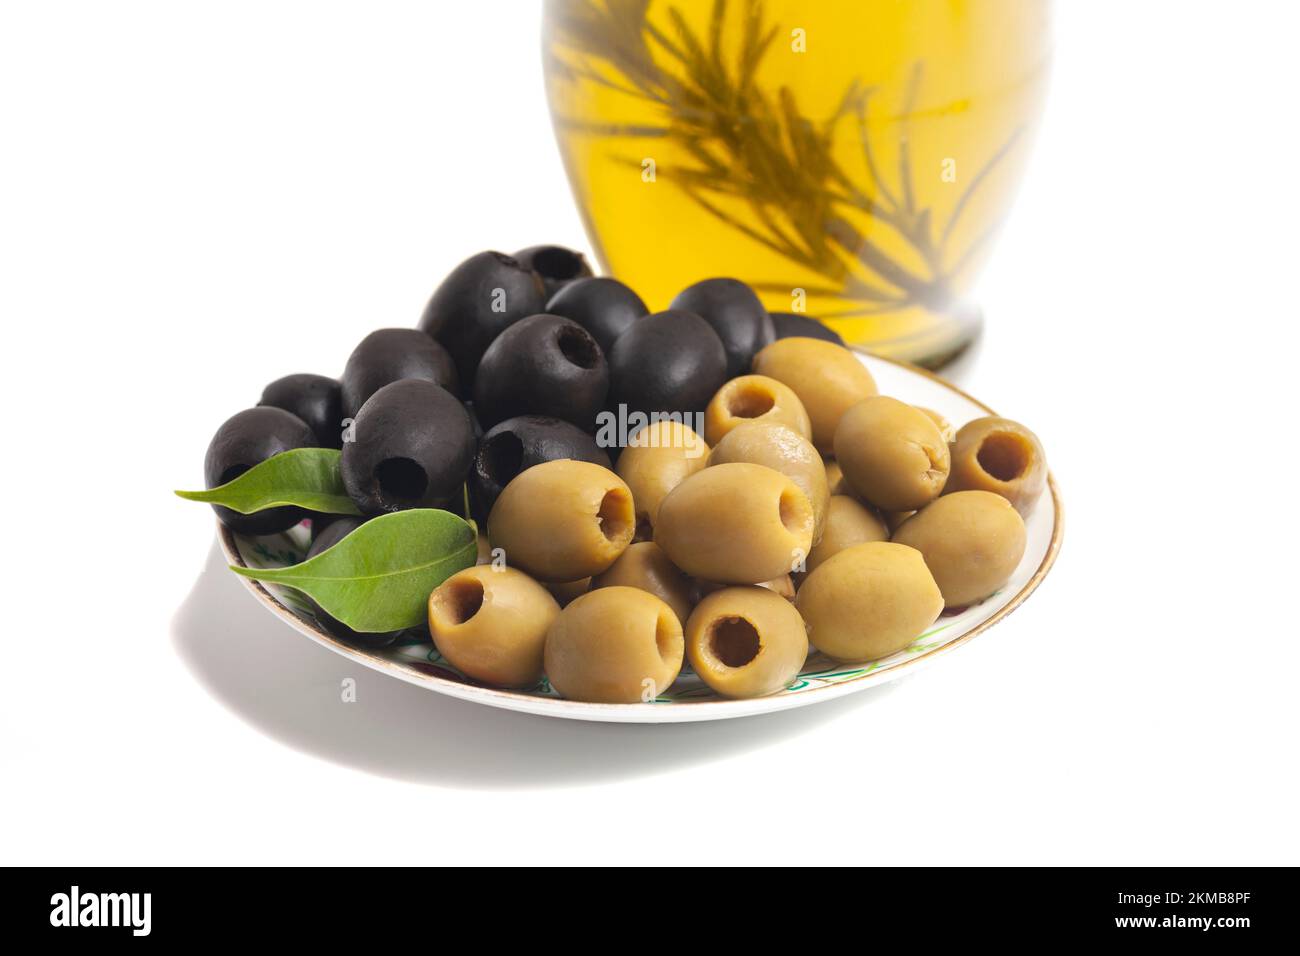 Jug with olive oil, green and black olives isolated on white background. Stock Photo